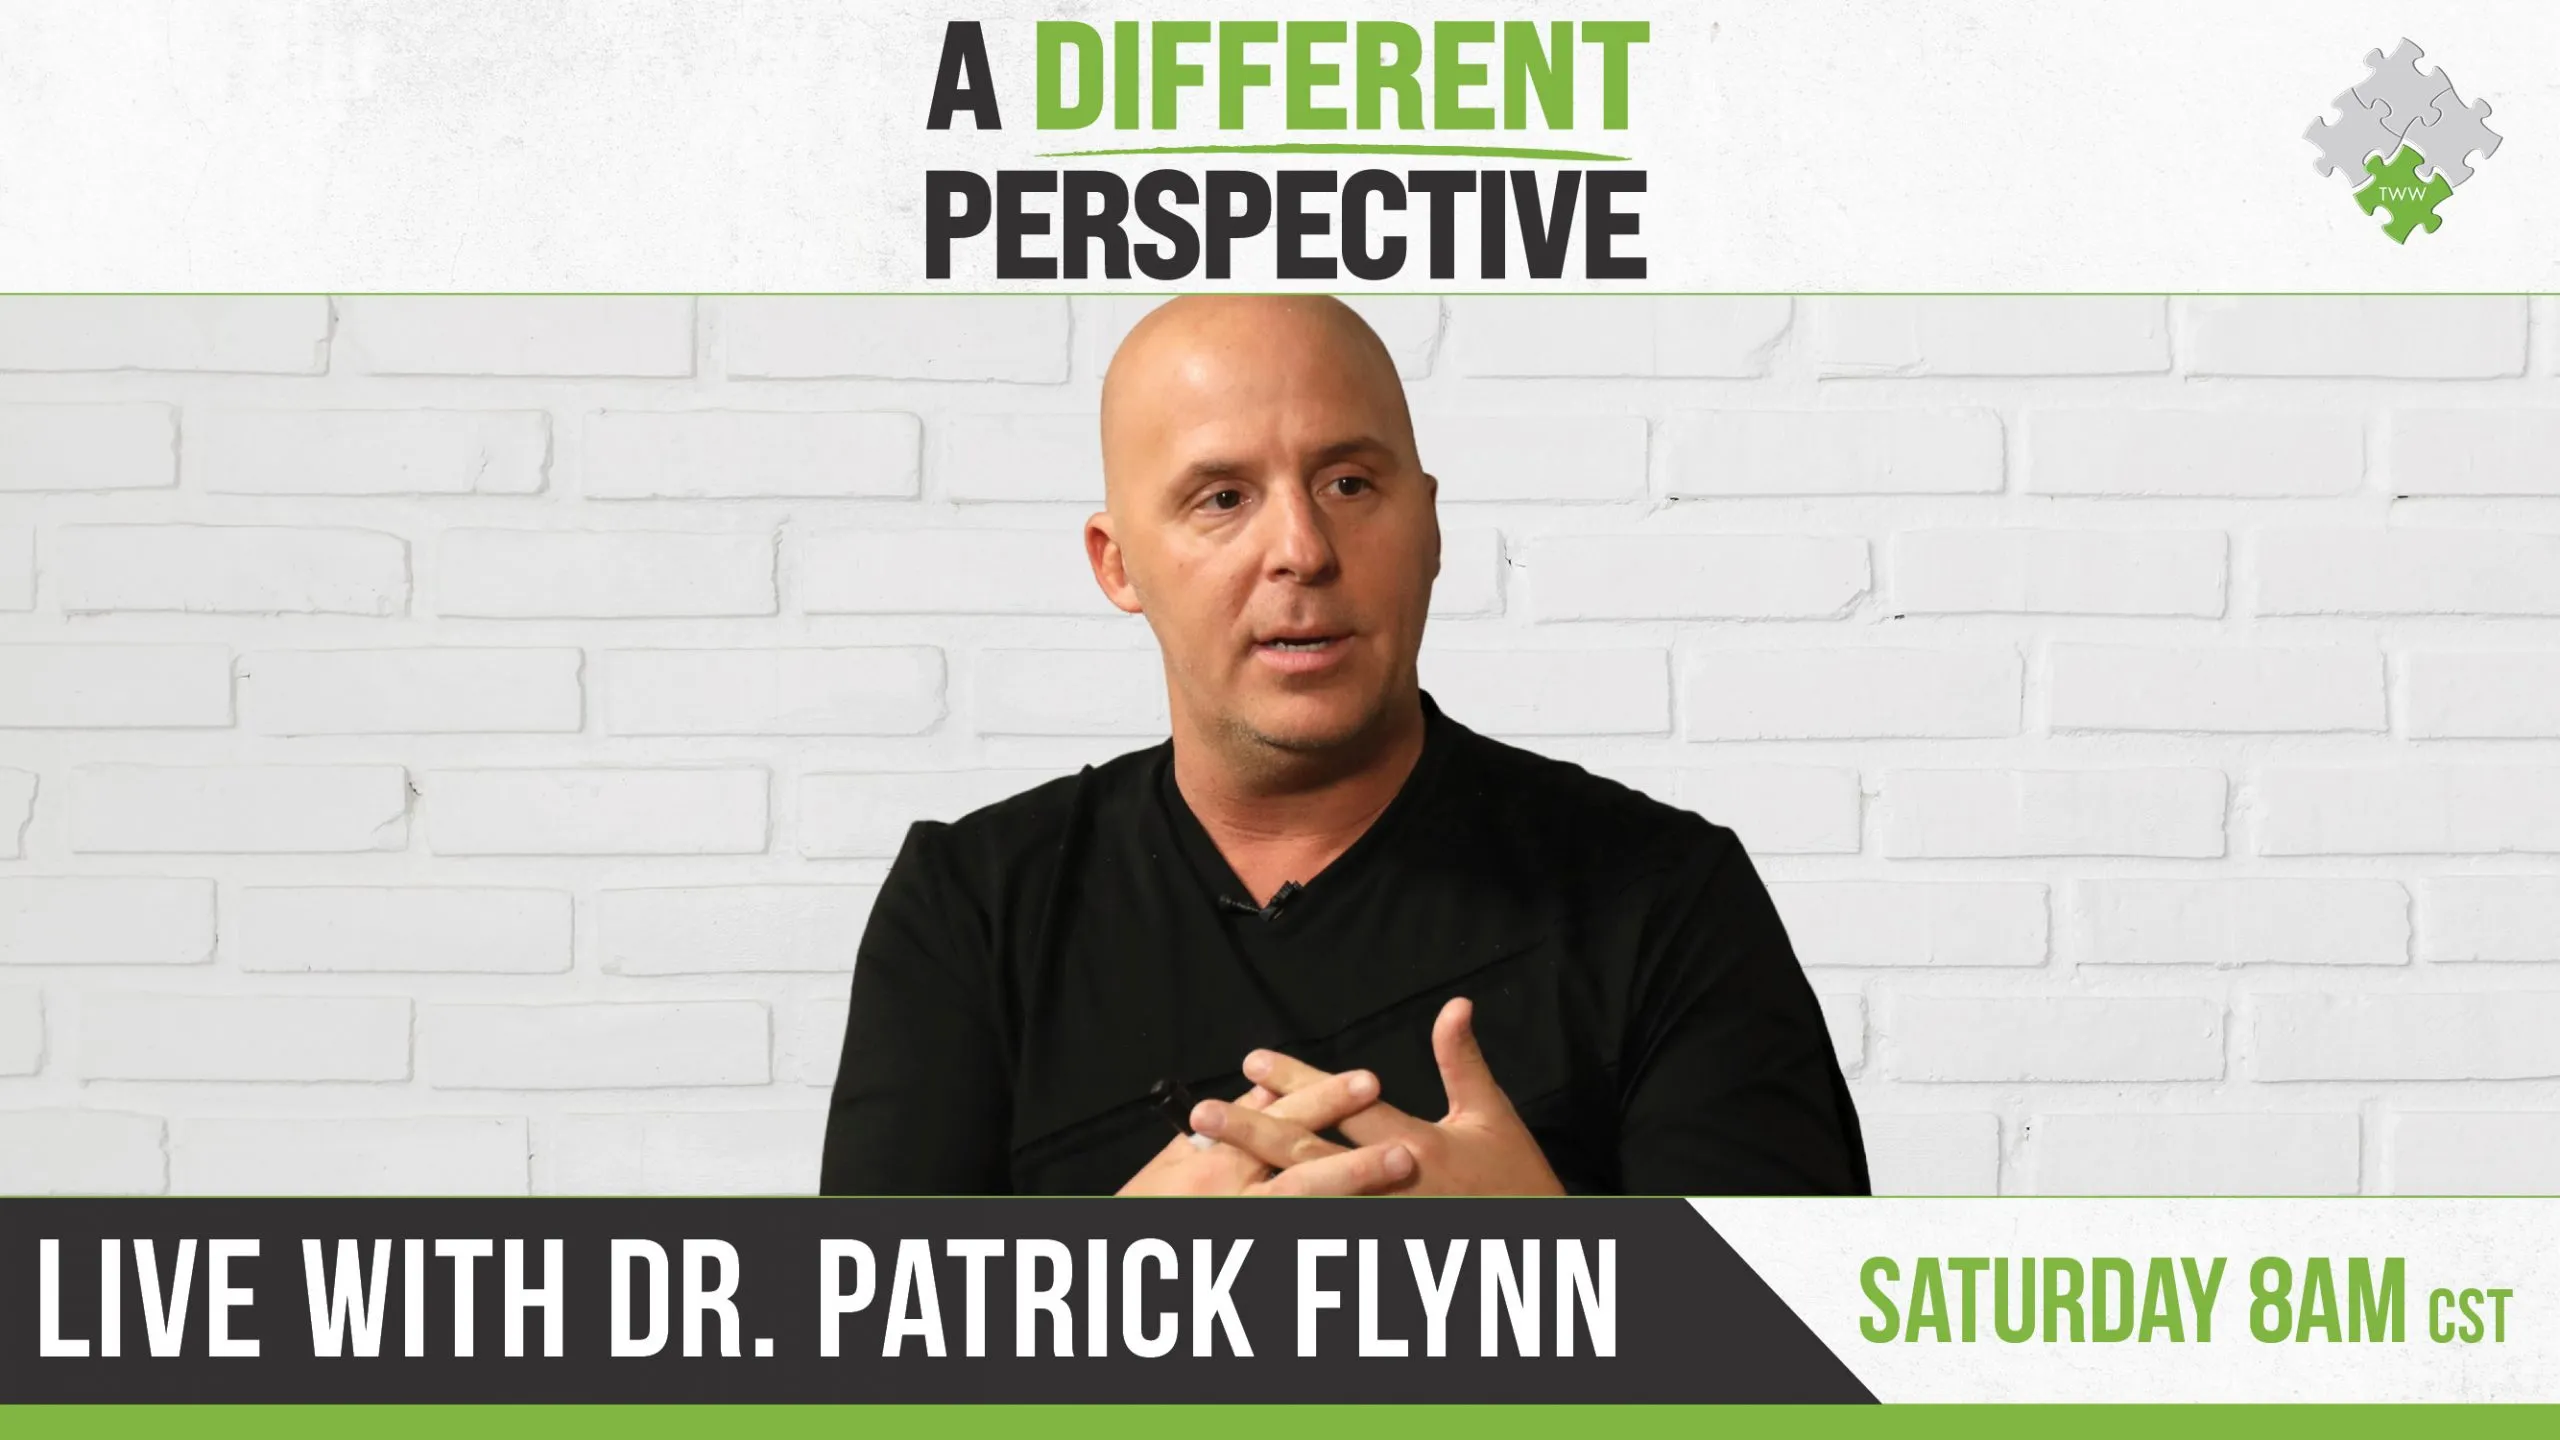 9.25.21 – “A Different Perspective with Dr. Patrick Flynn” Recap